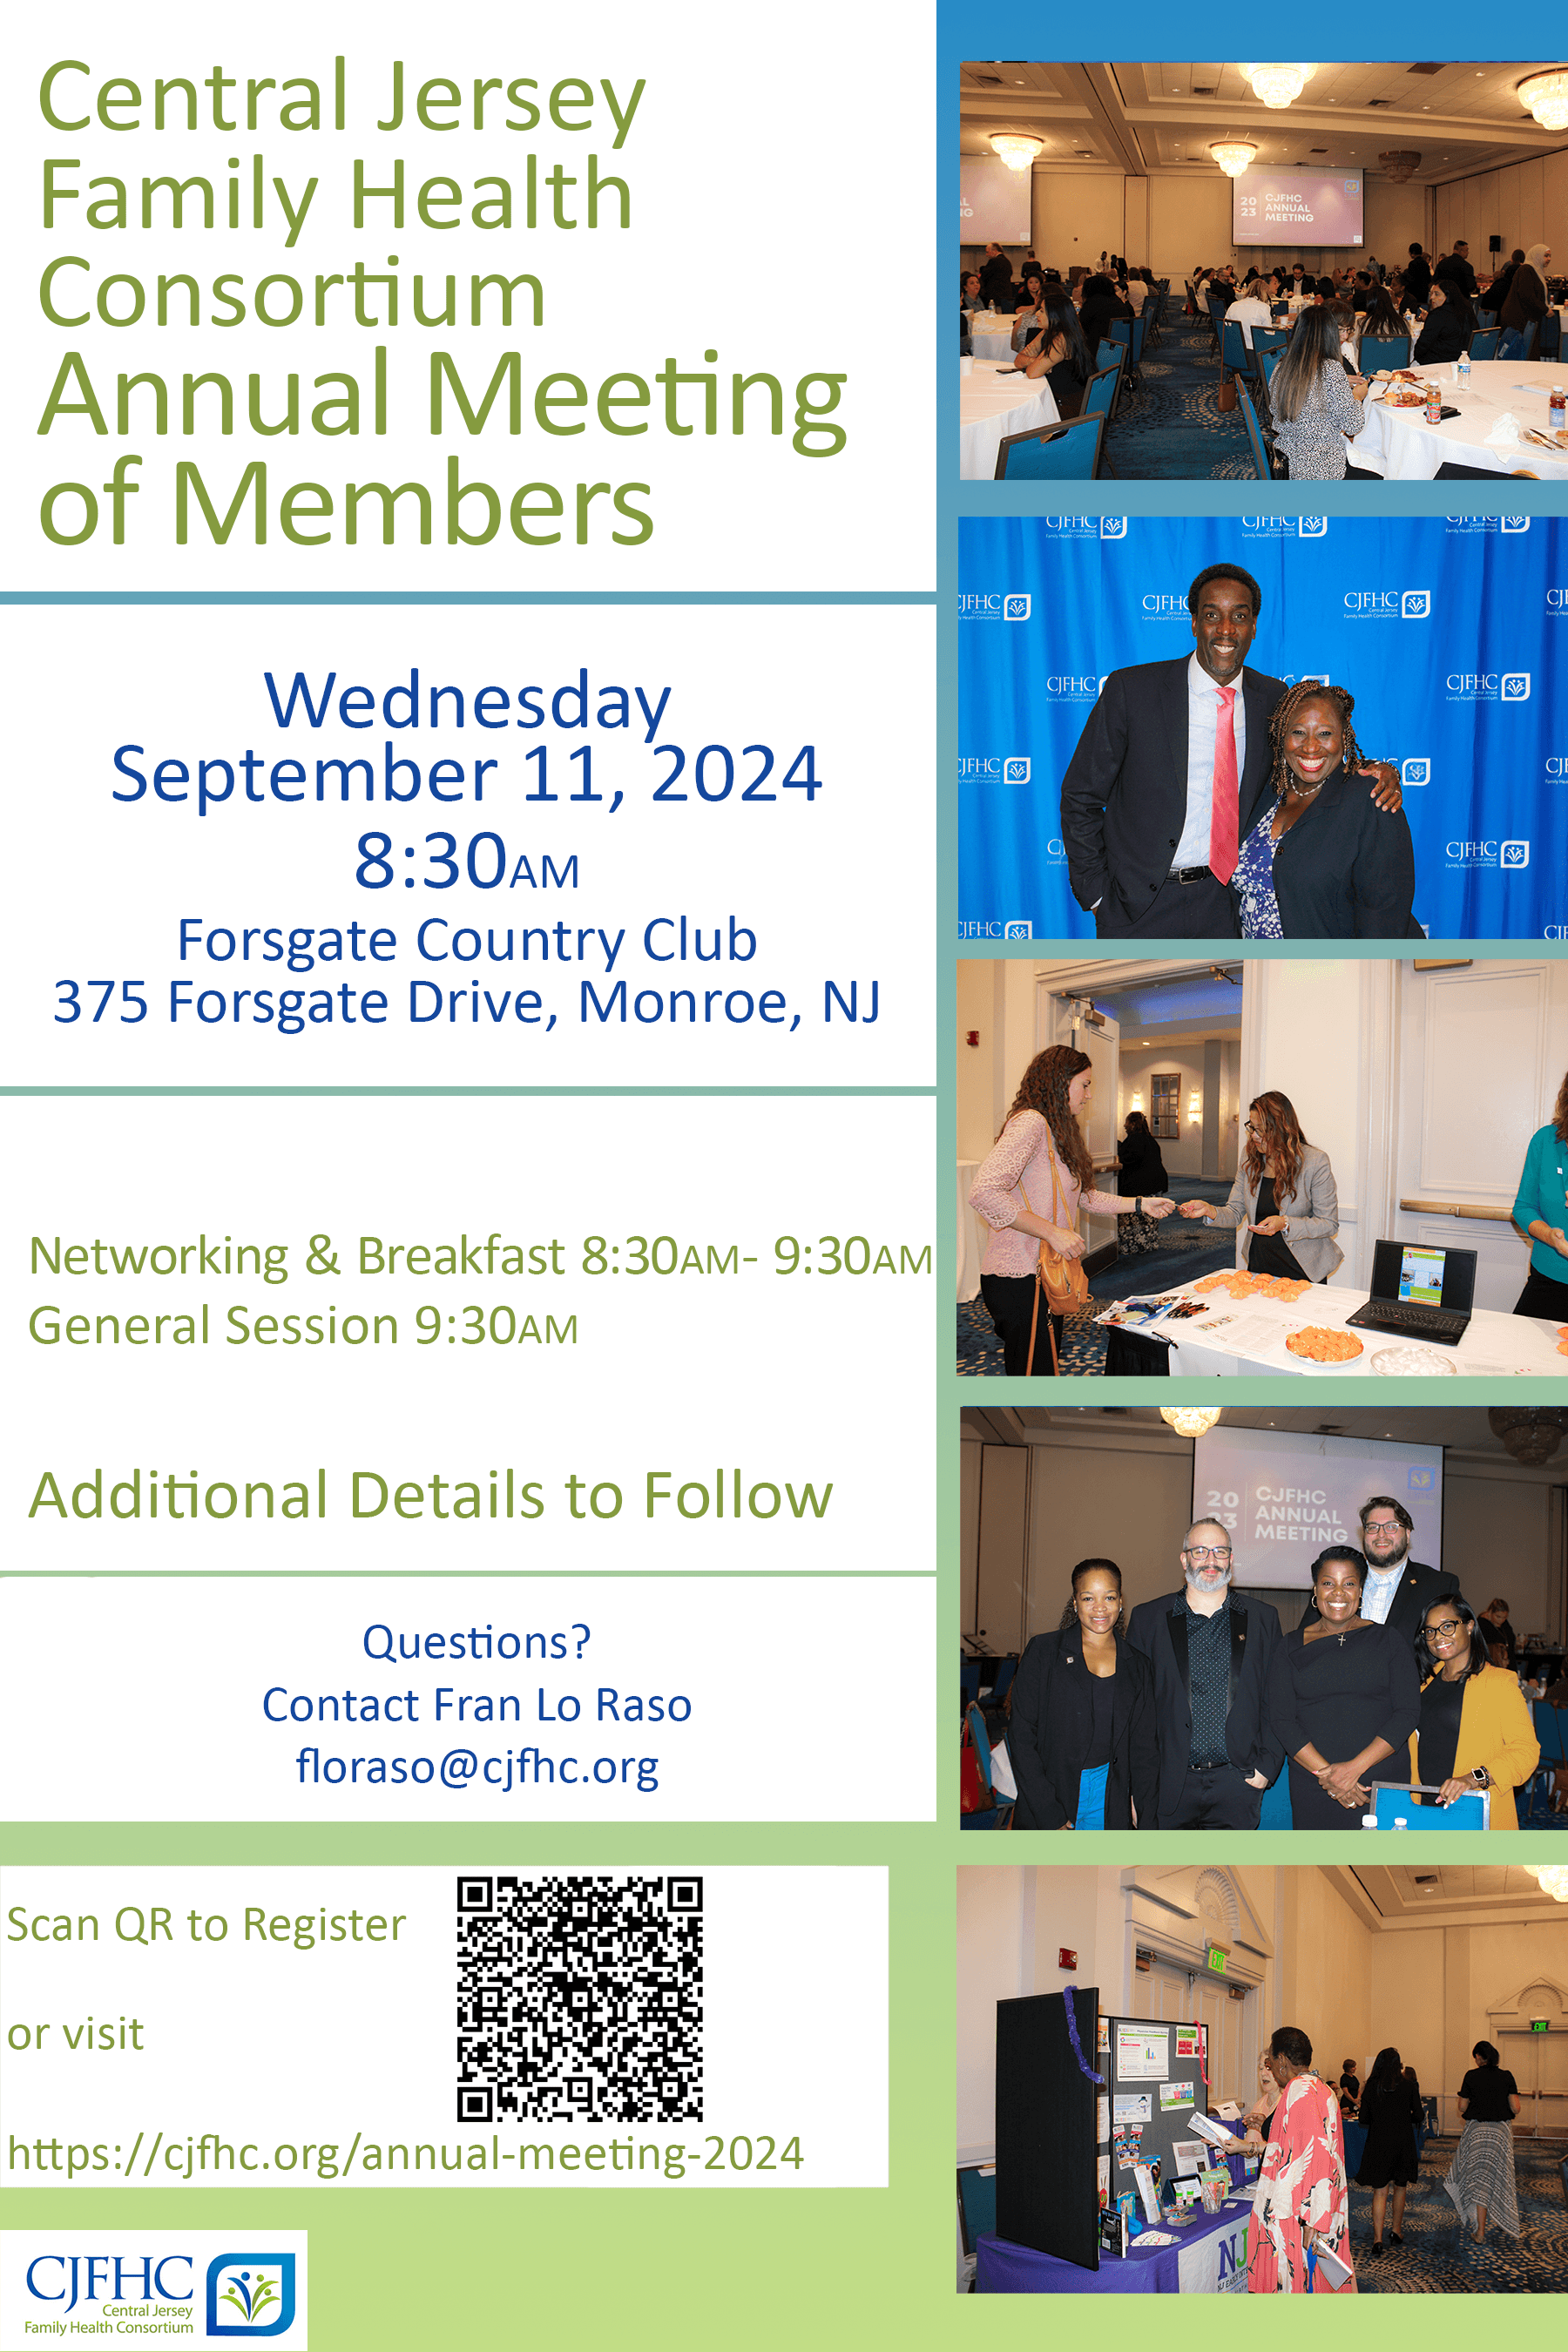 Join Us for the CJFHC’s Annual Meeting on September 11, 2024!